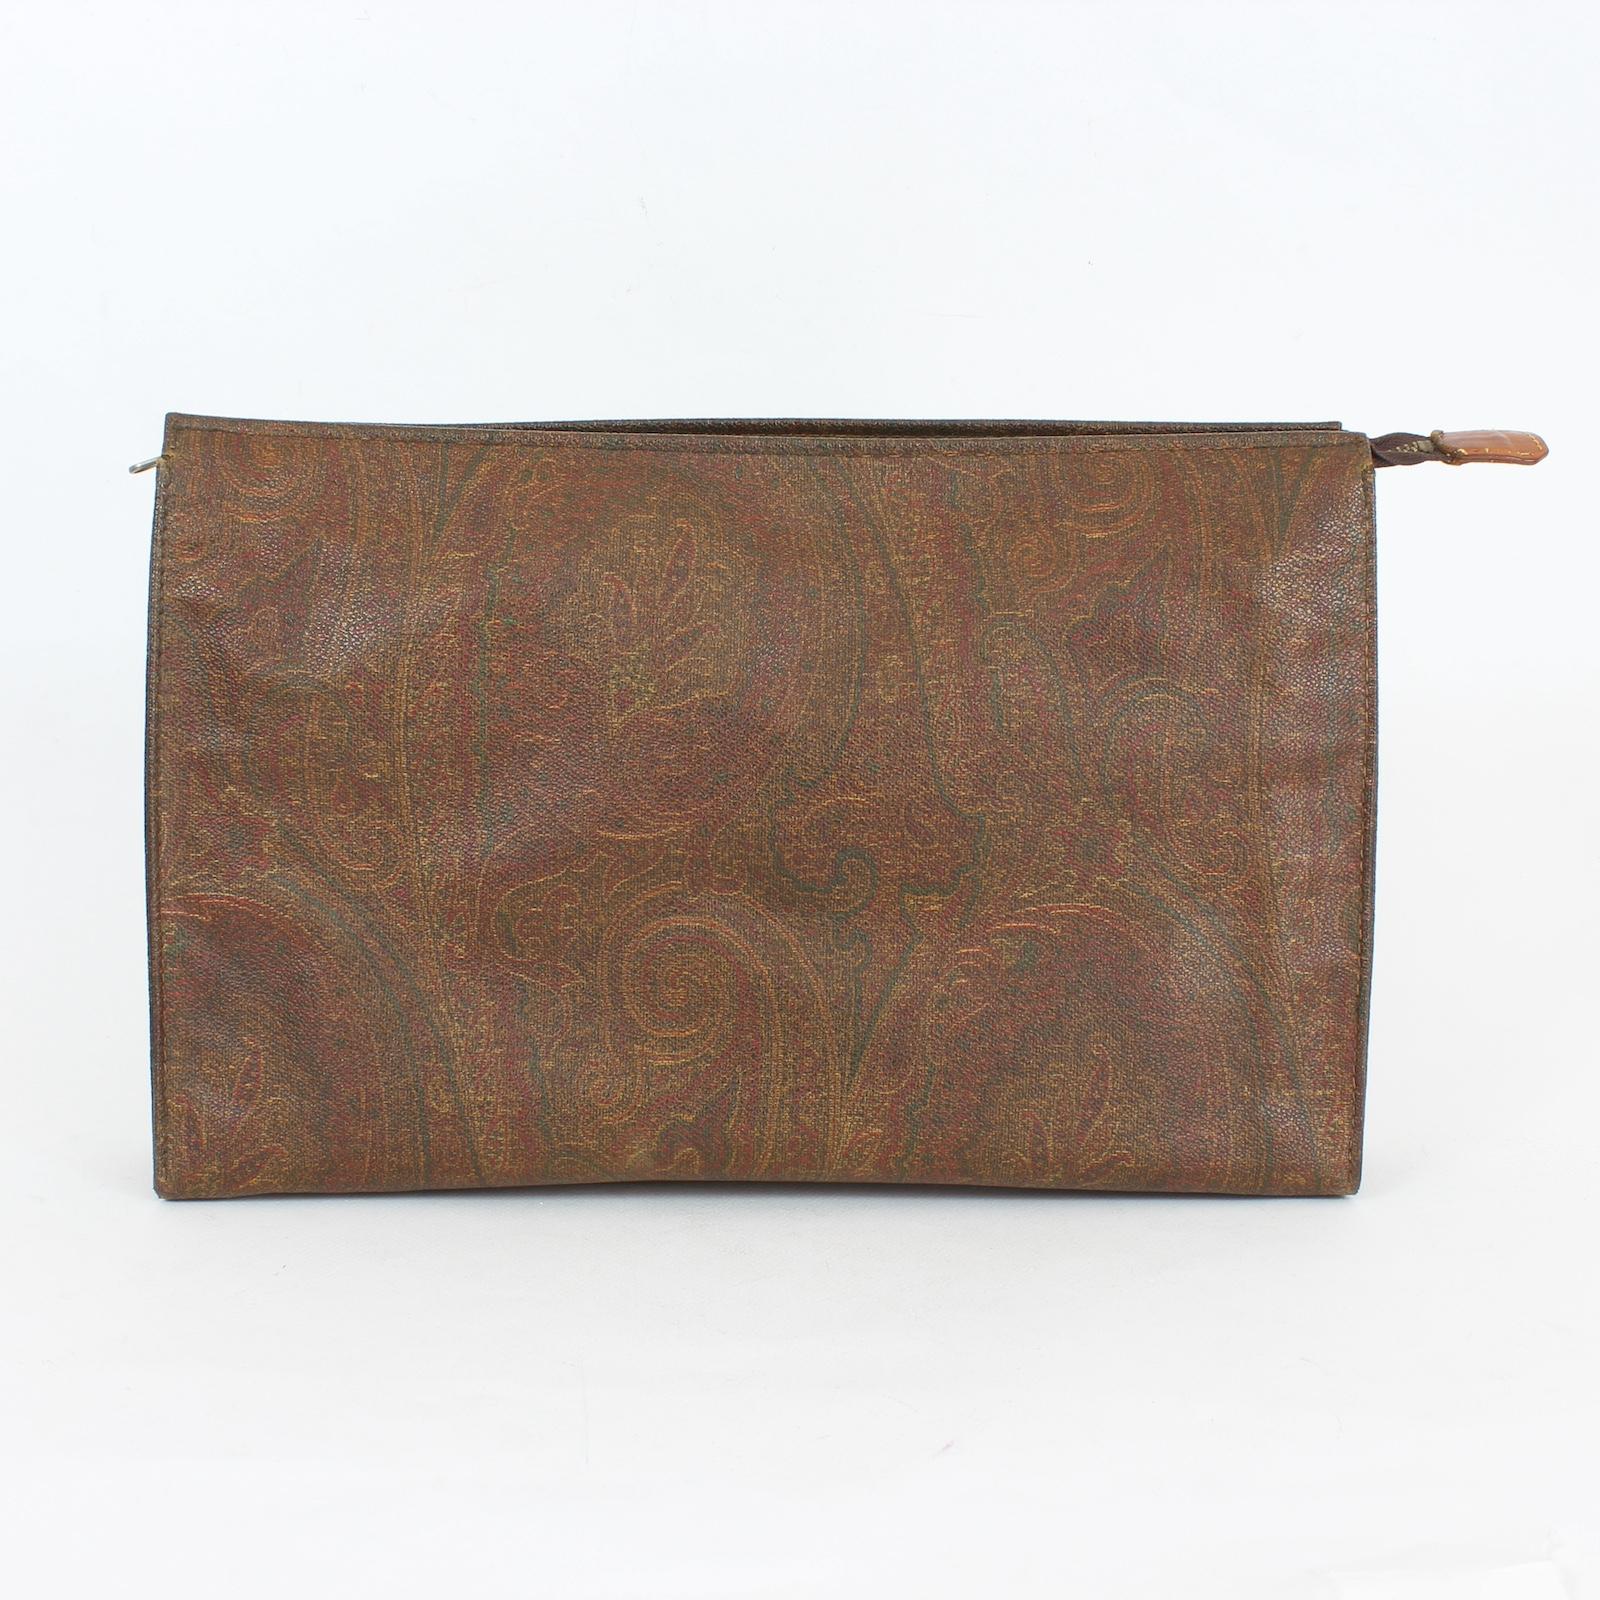 Etro clutch bag vintage 90s. Brown handbag with typical paisley pattern. Rigid canvas fabric zipper closure. Made in italy. The dust bag is present. The bag is in excellent condition on the outside, but on the inside it is a little cracked.

Height: